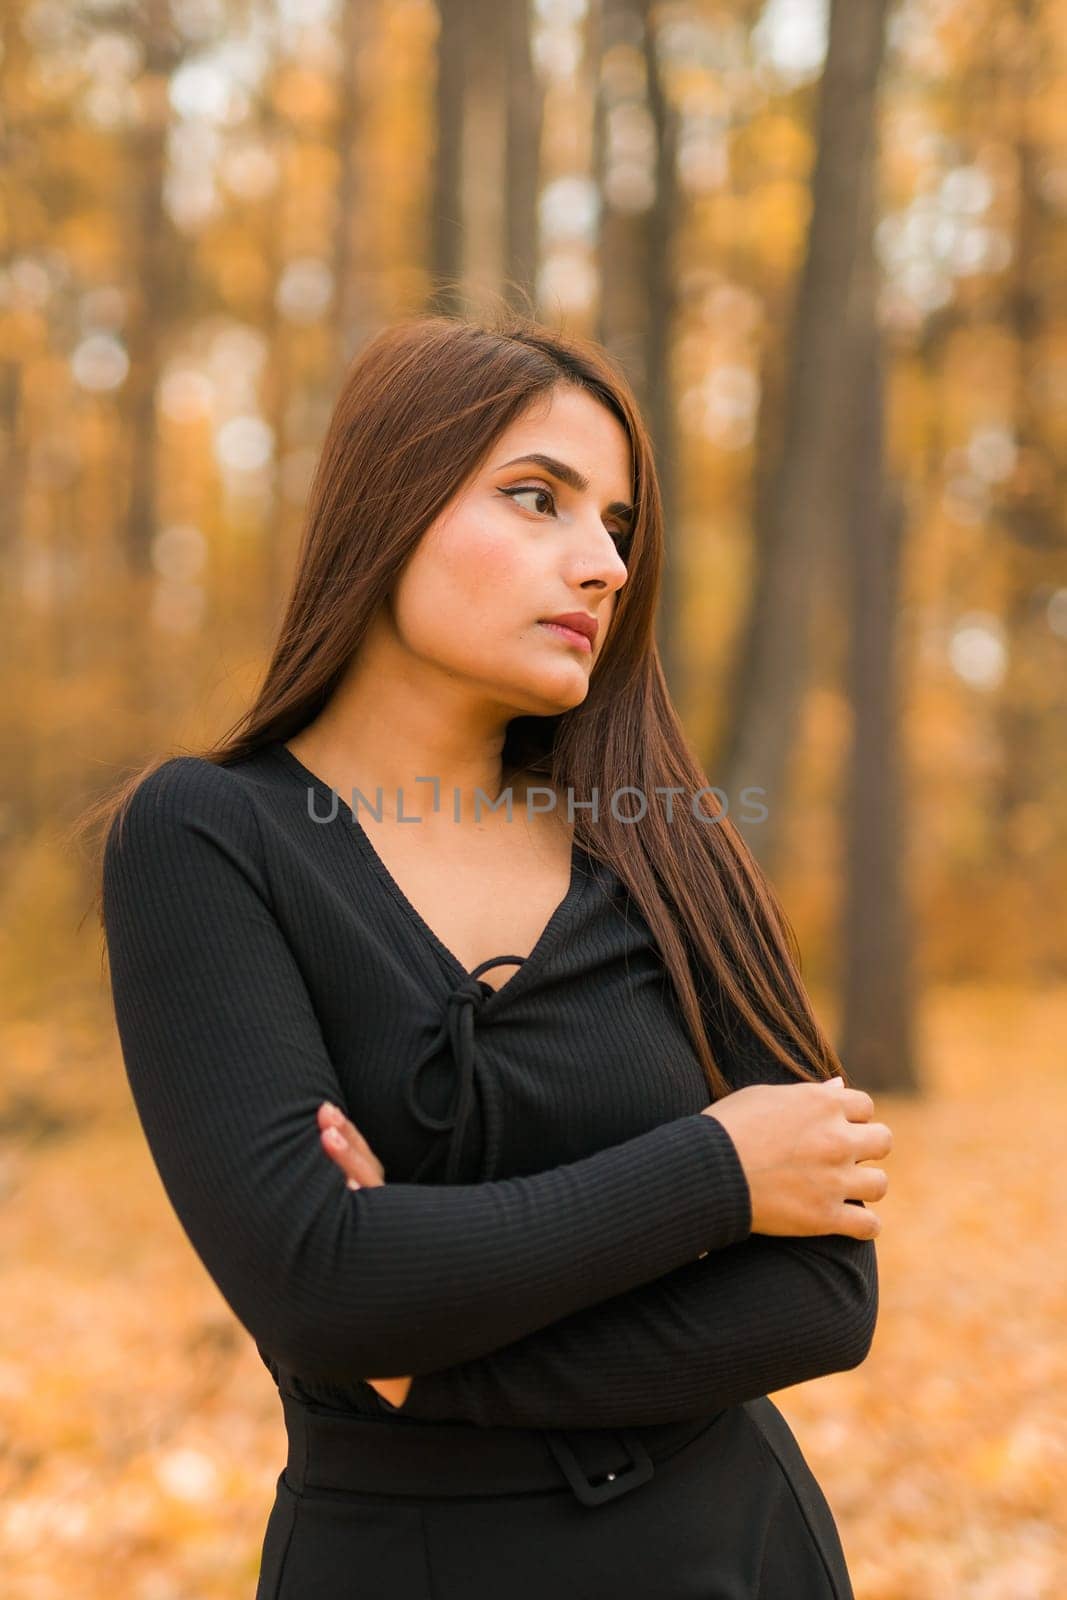 Beautiful indian woman generation z relaxing and feeling nature at autumn park in fall season. Diversity and gen z youth.